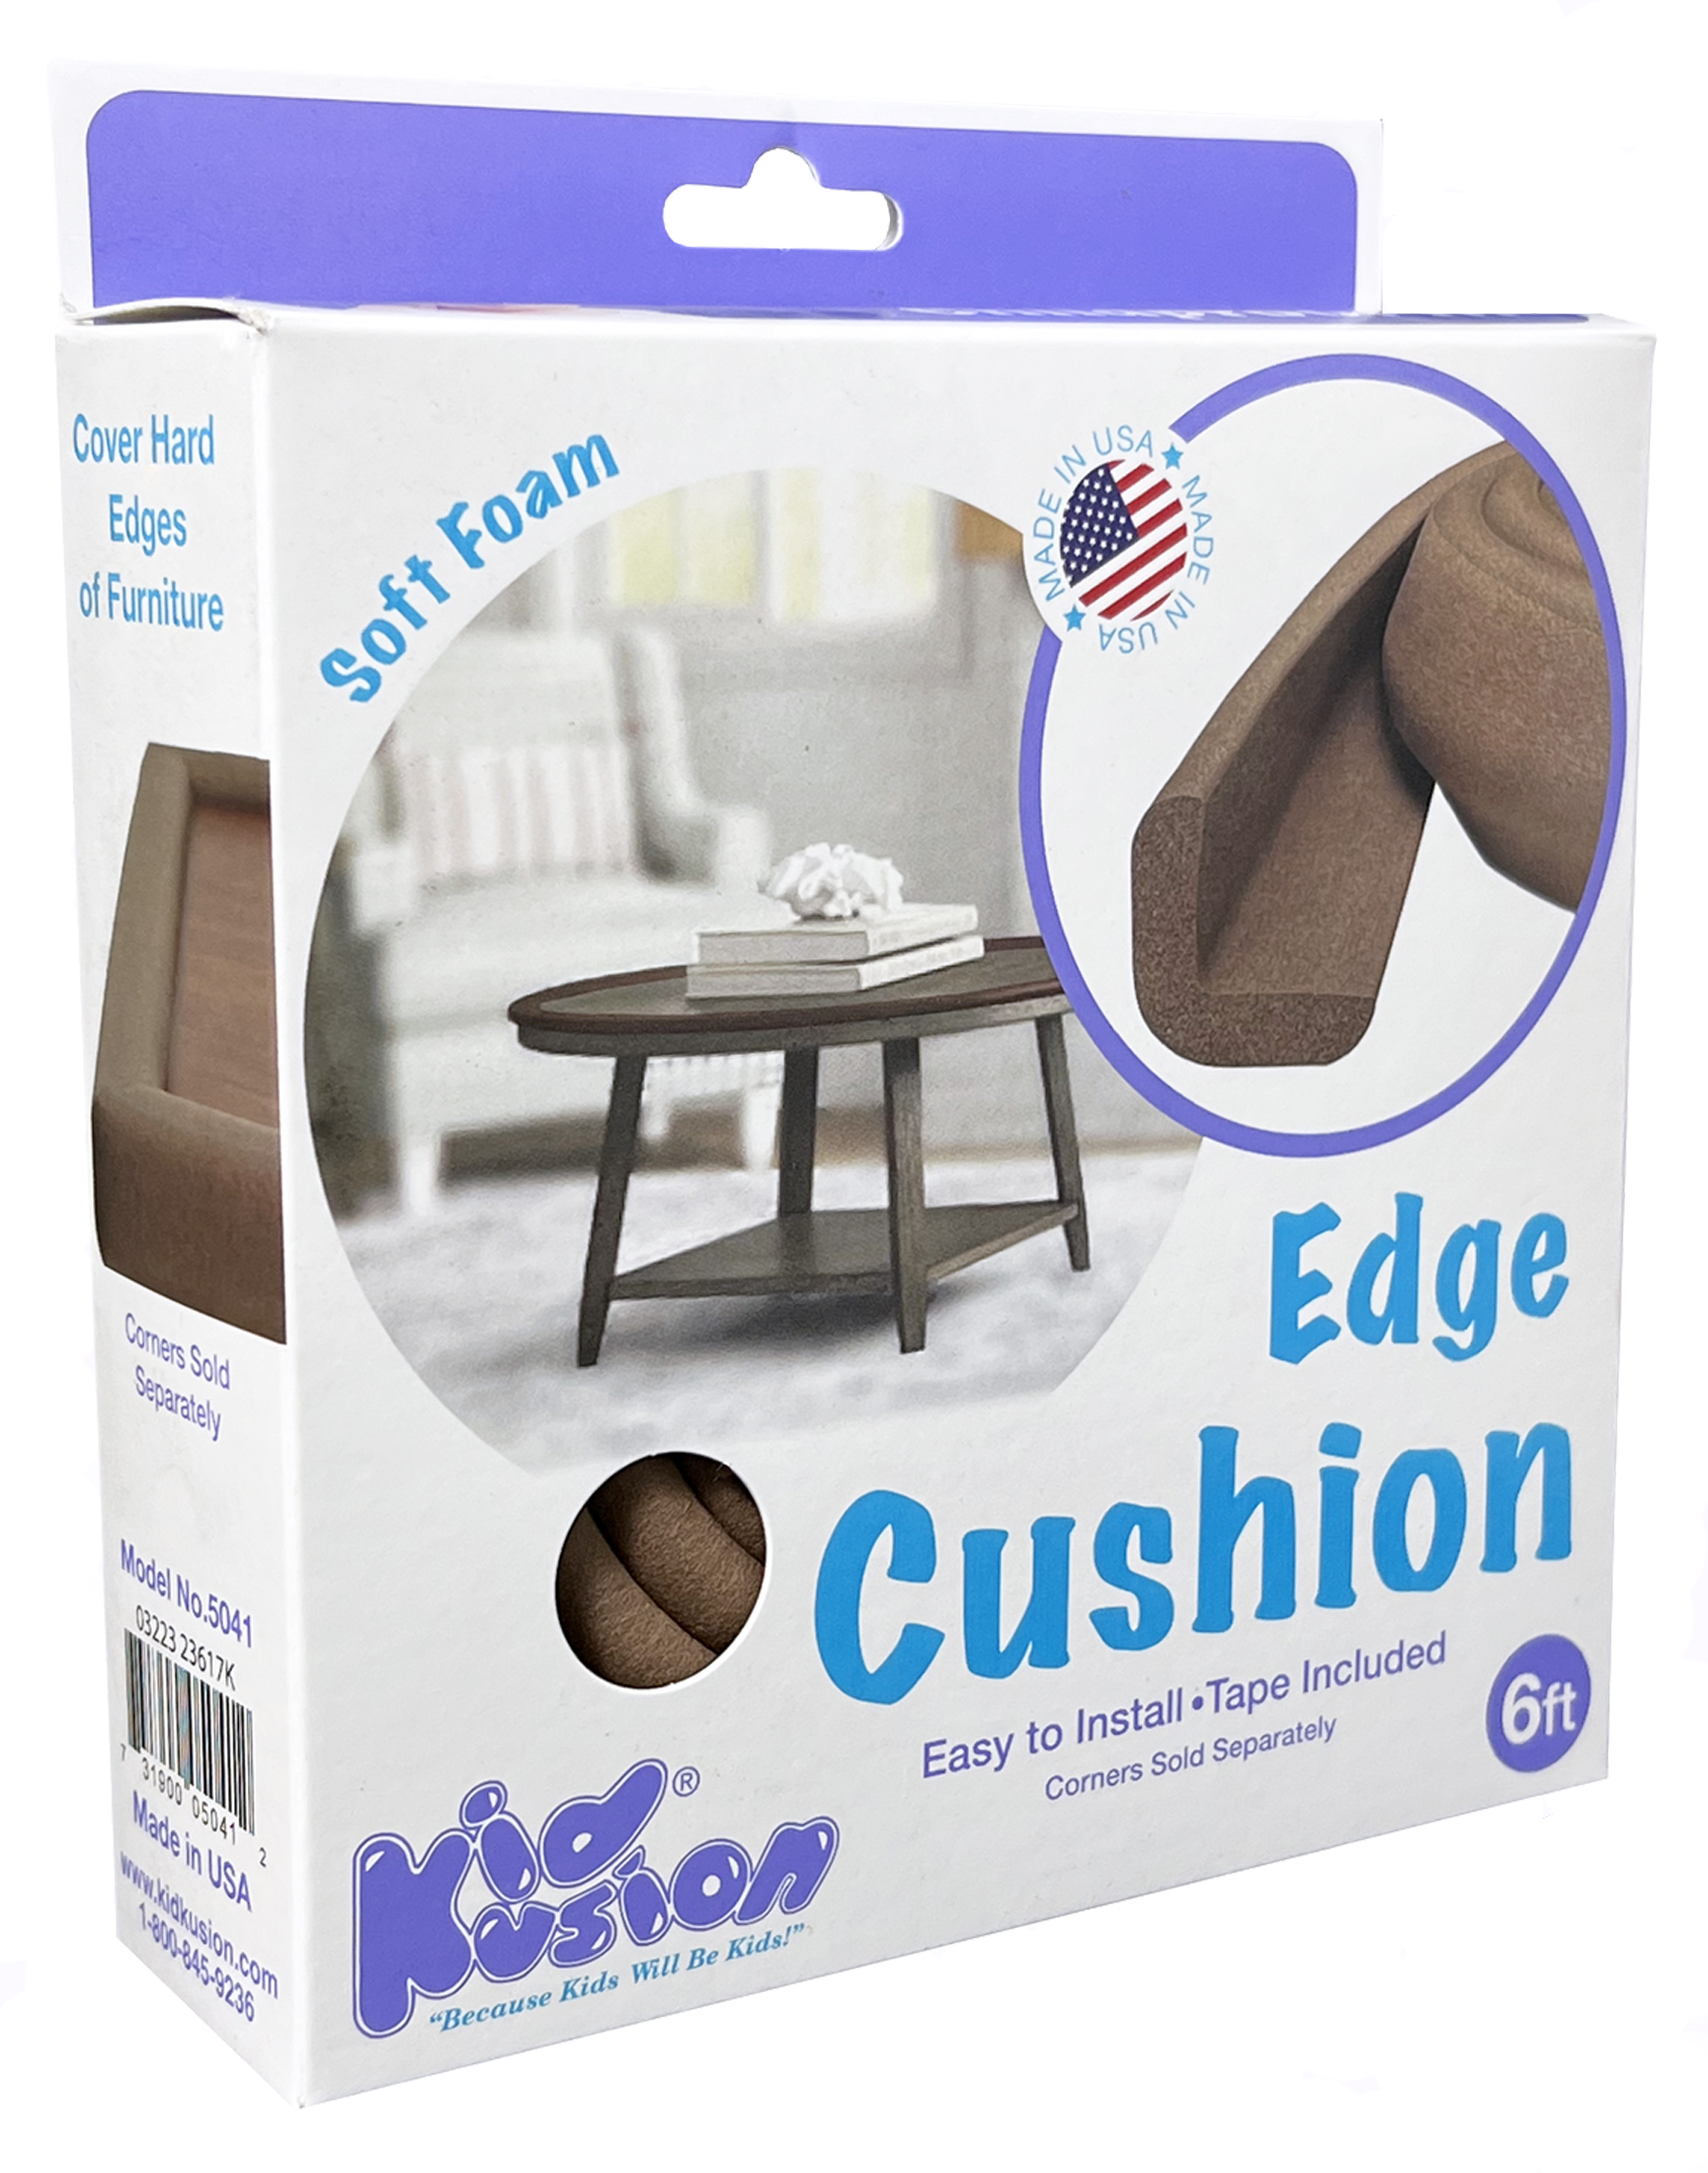 KidKusion Baby Proofing Foam Rubber Edge Cushion, Edge Protector for Tables, Furniture and more, 6 Ft, 1 CT - image 5 of 6